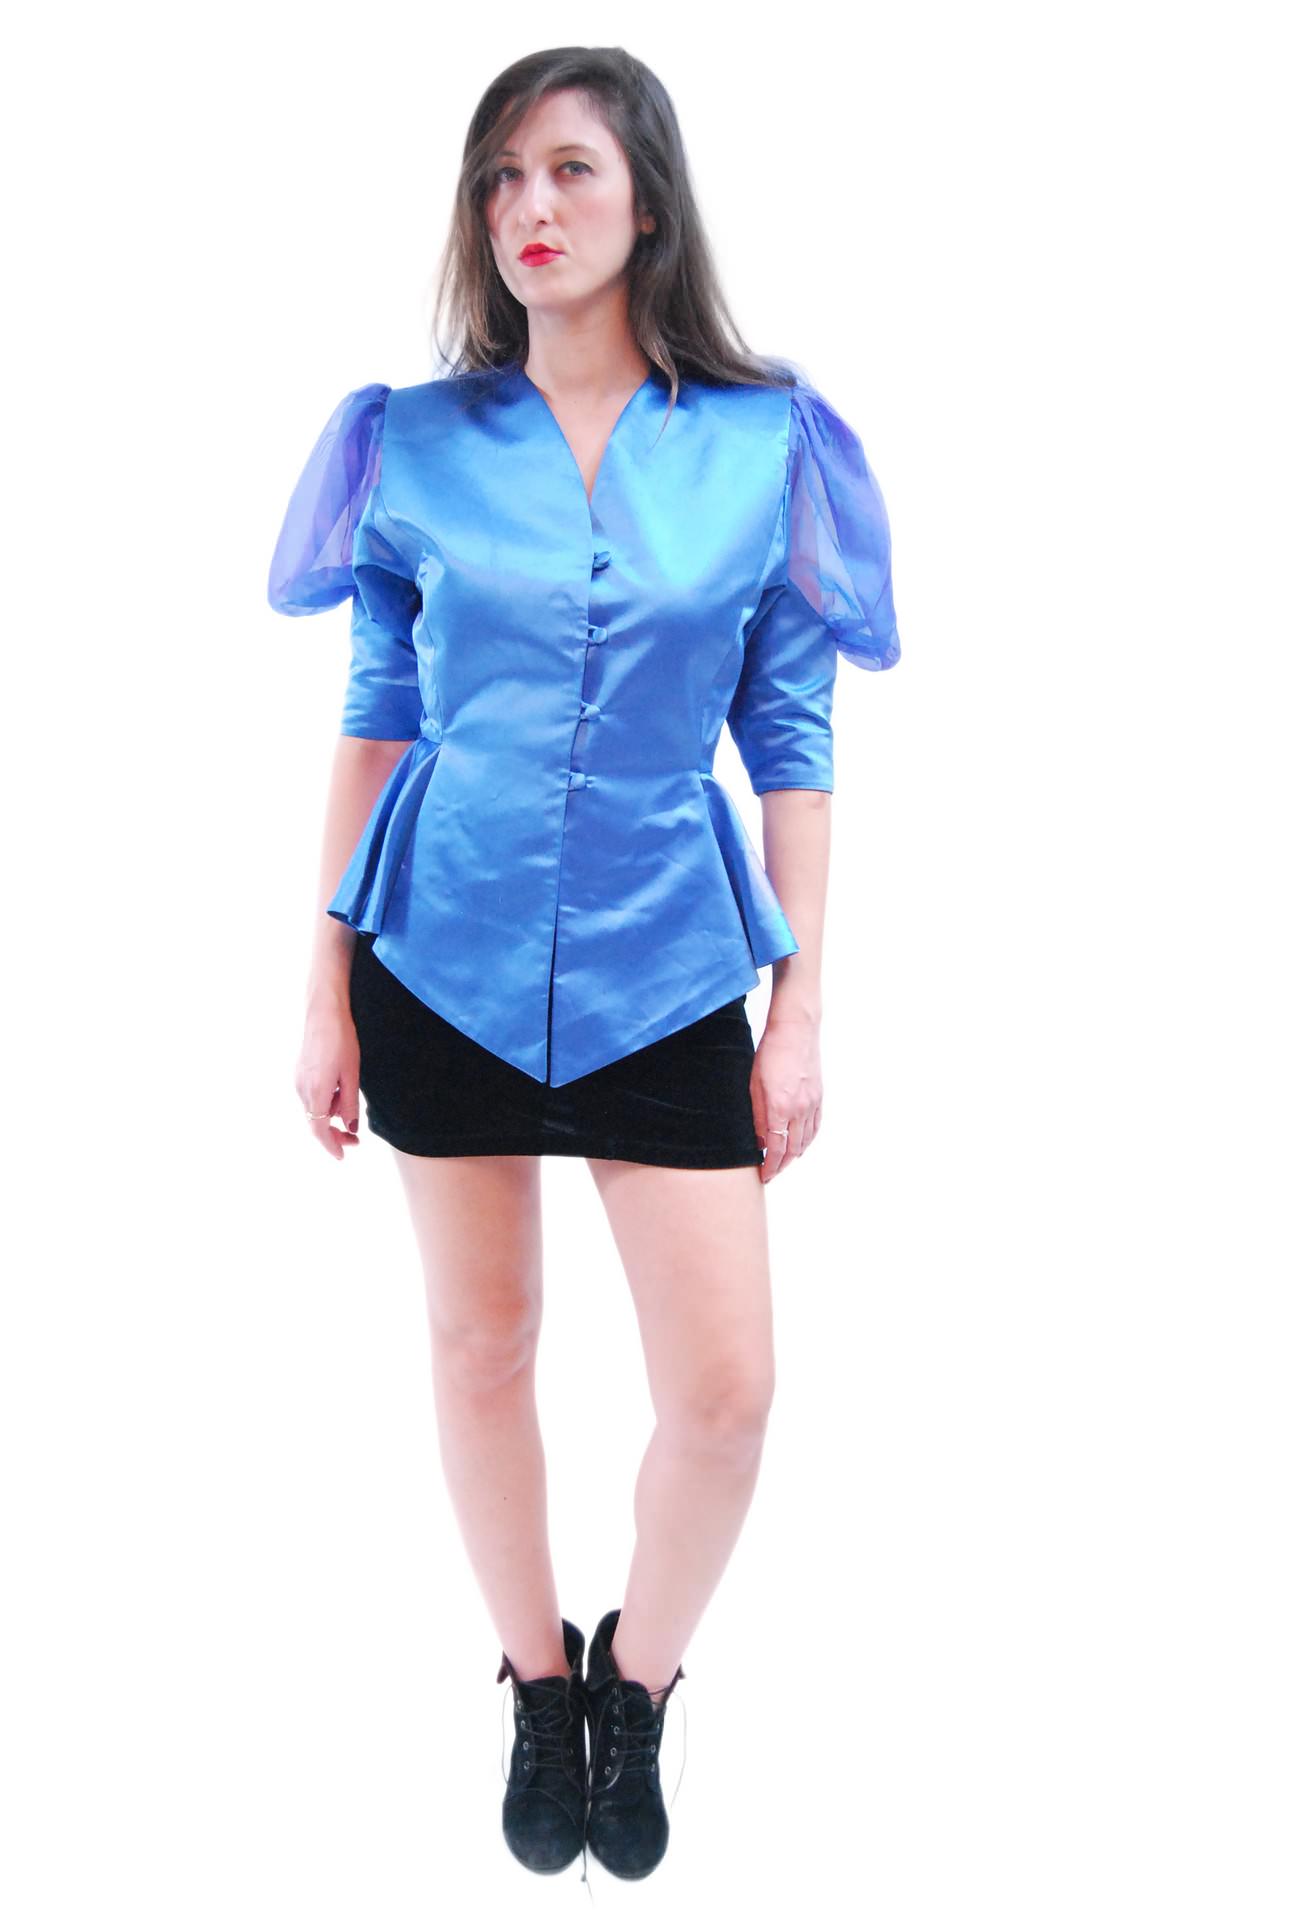 Wear and blue pepper vintage blouses for women sale women over